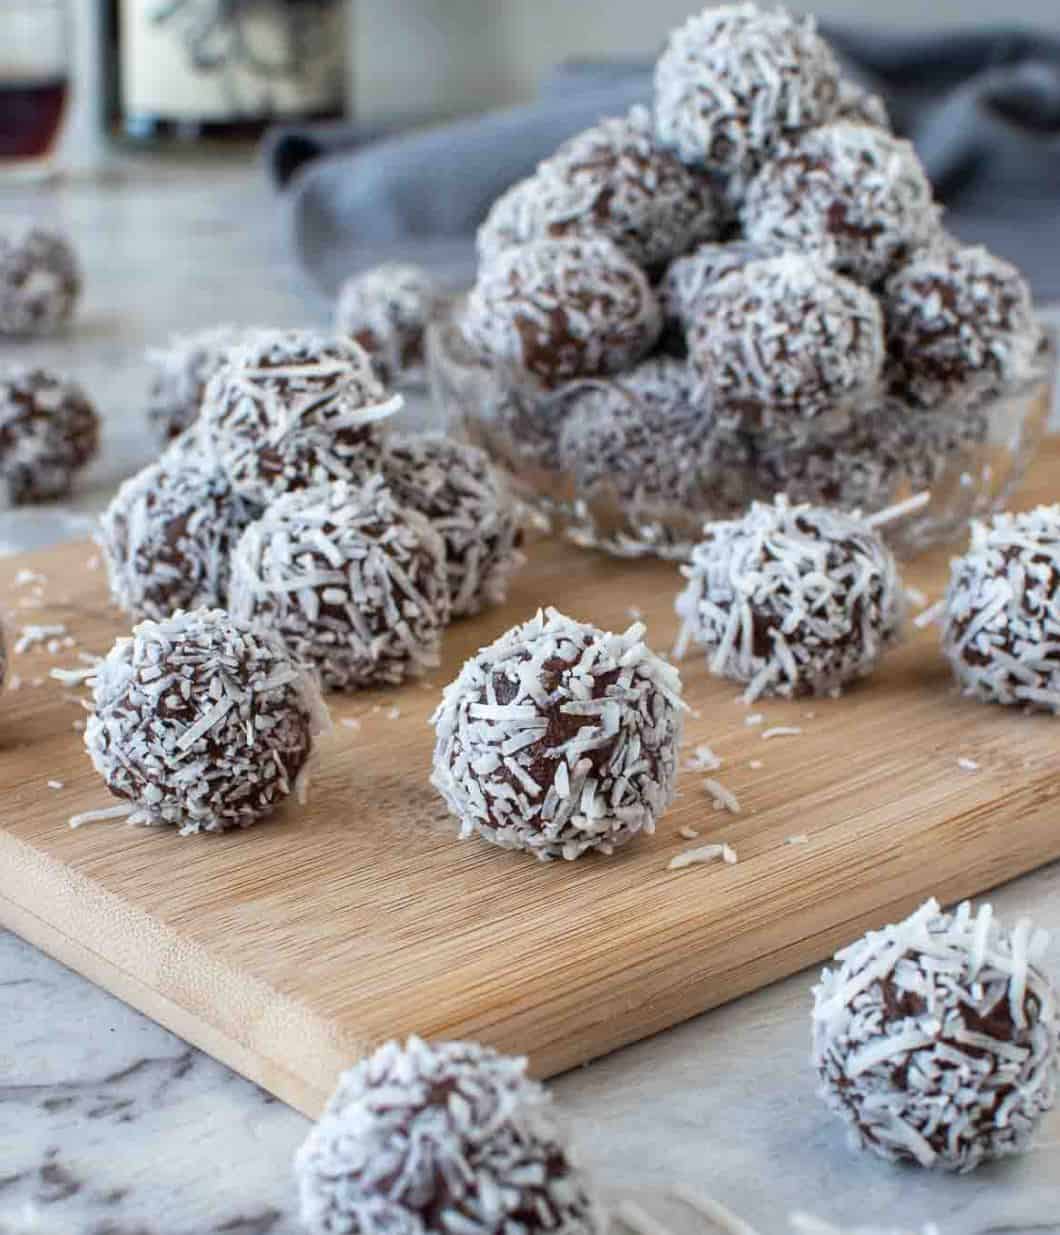 Truffle balls covered in coconut on a wooden cutting board.